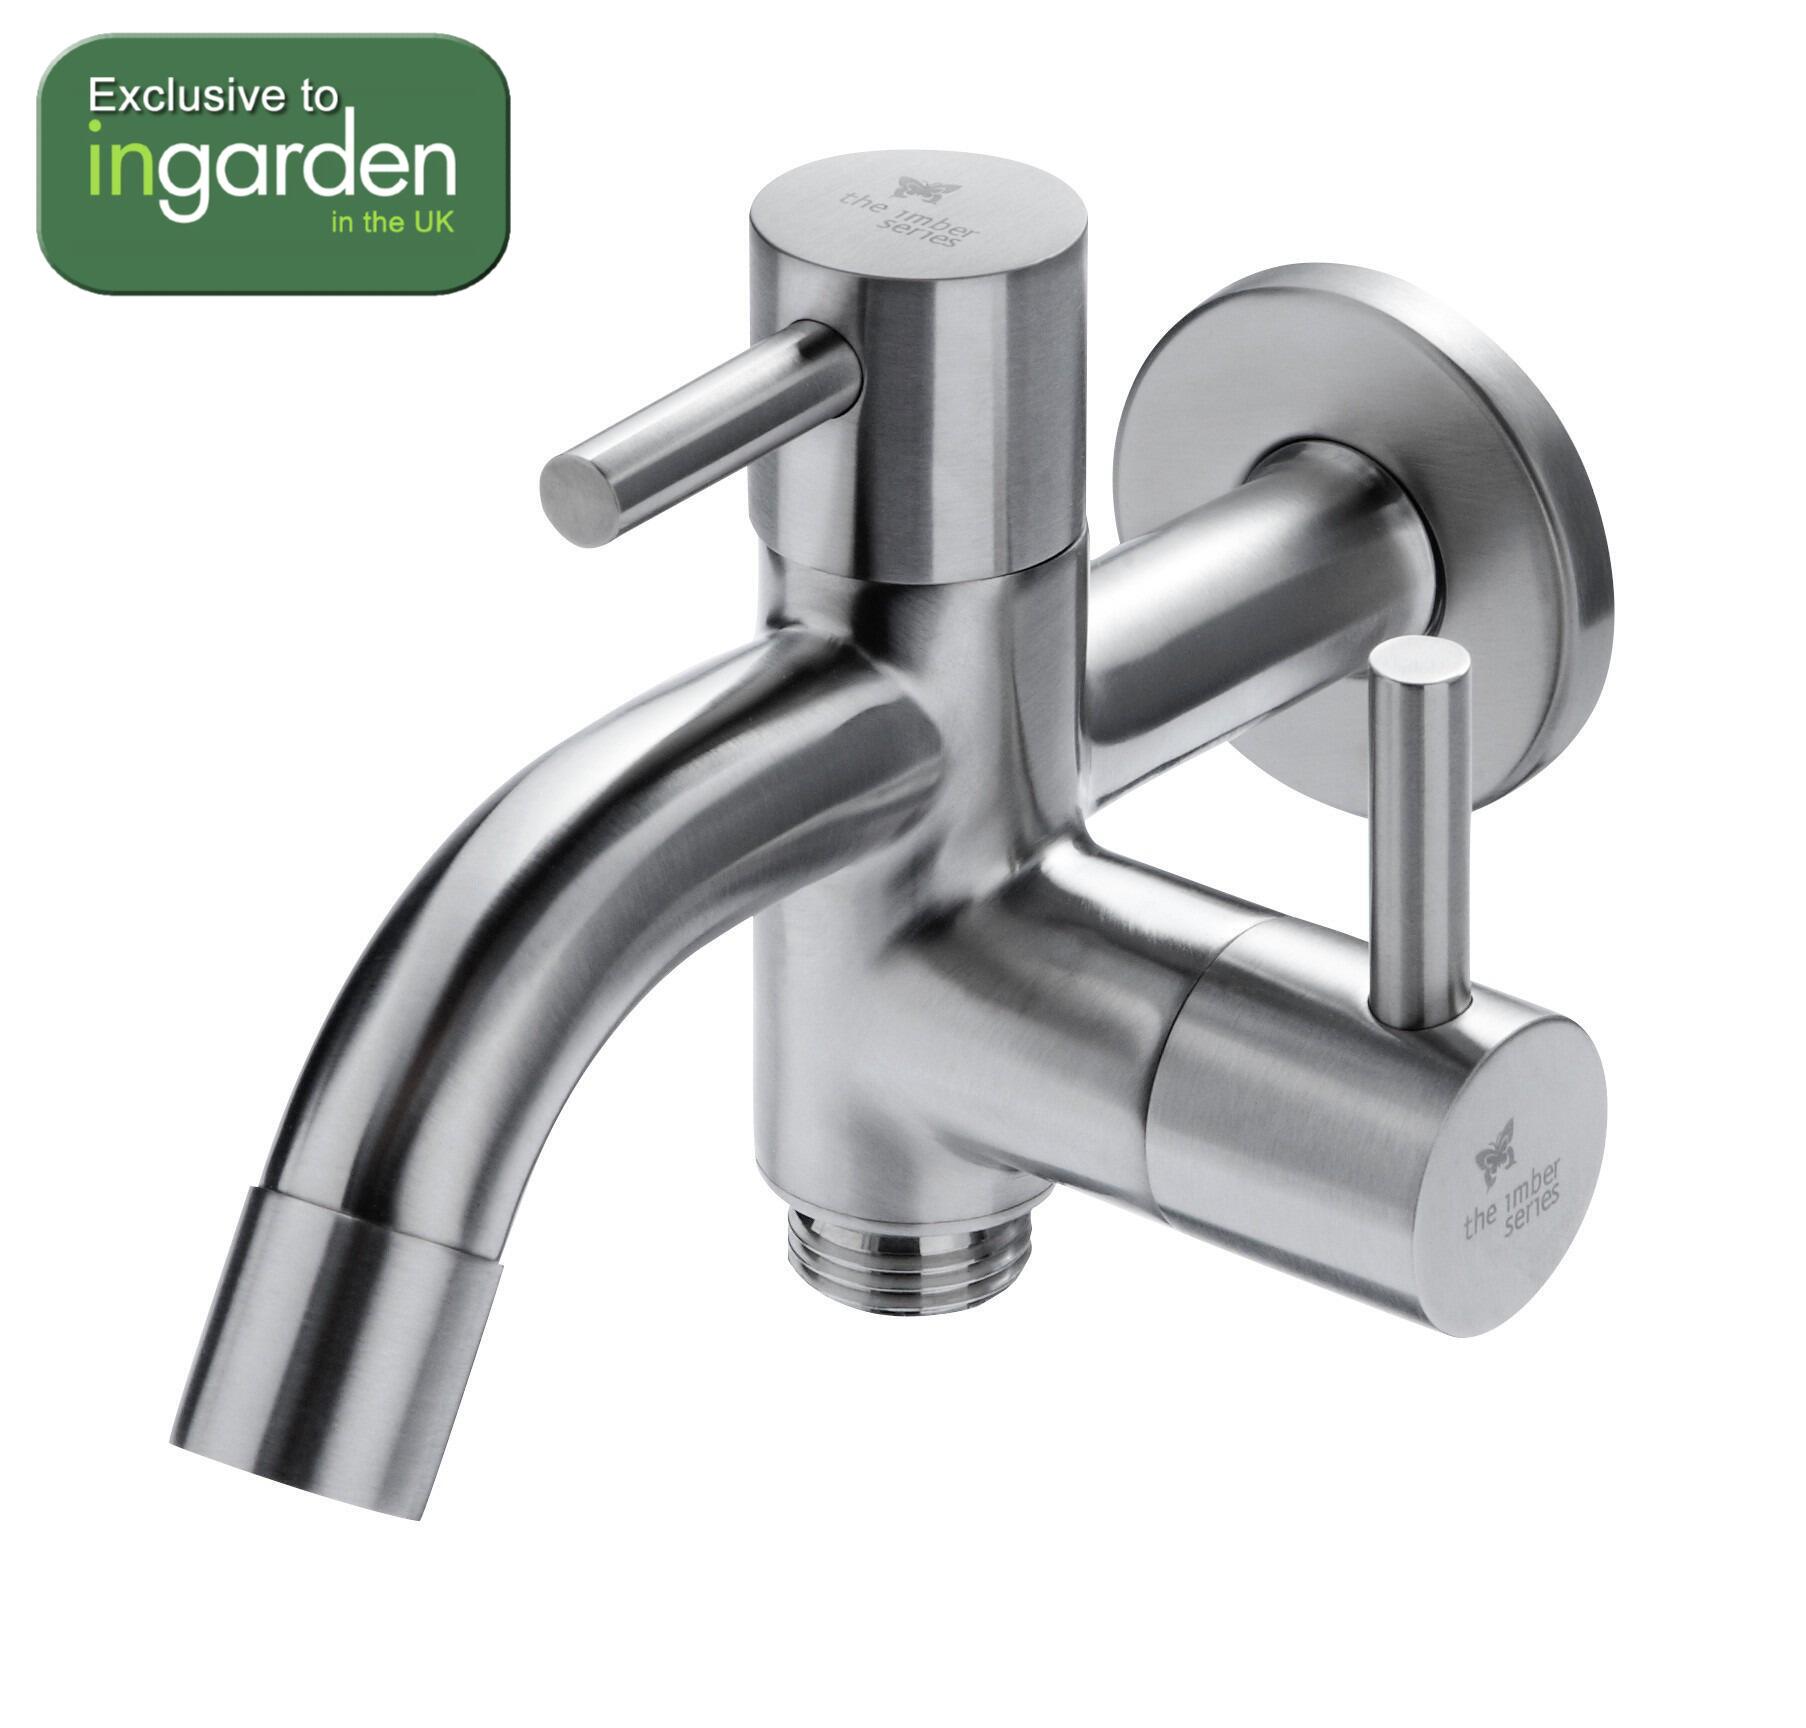 marine grade 316 stainless steel double wall tap single feed spout garden outdoor use